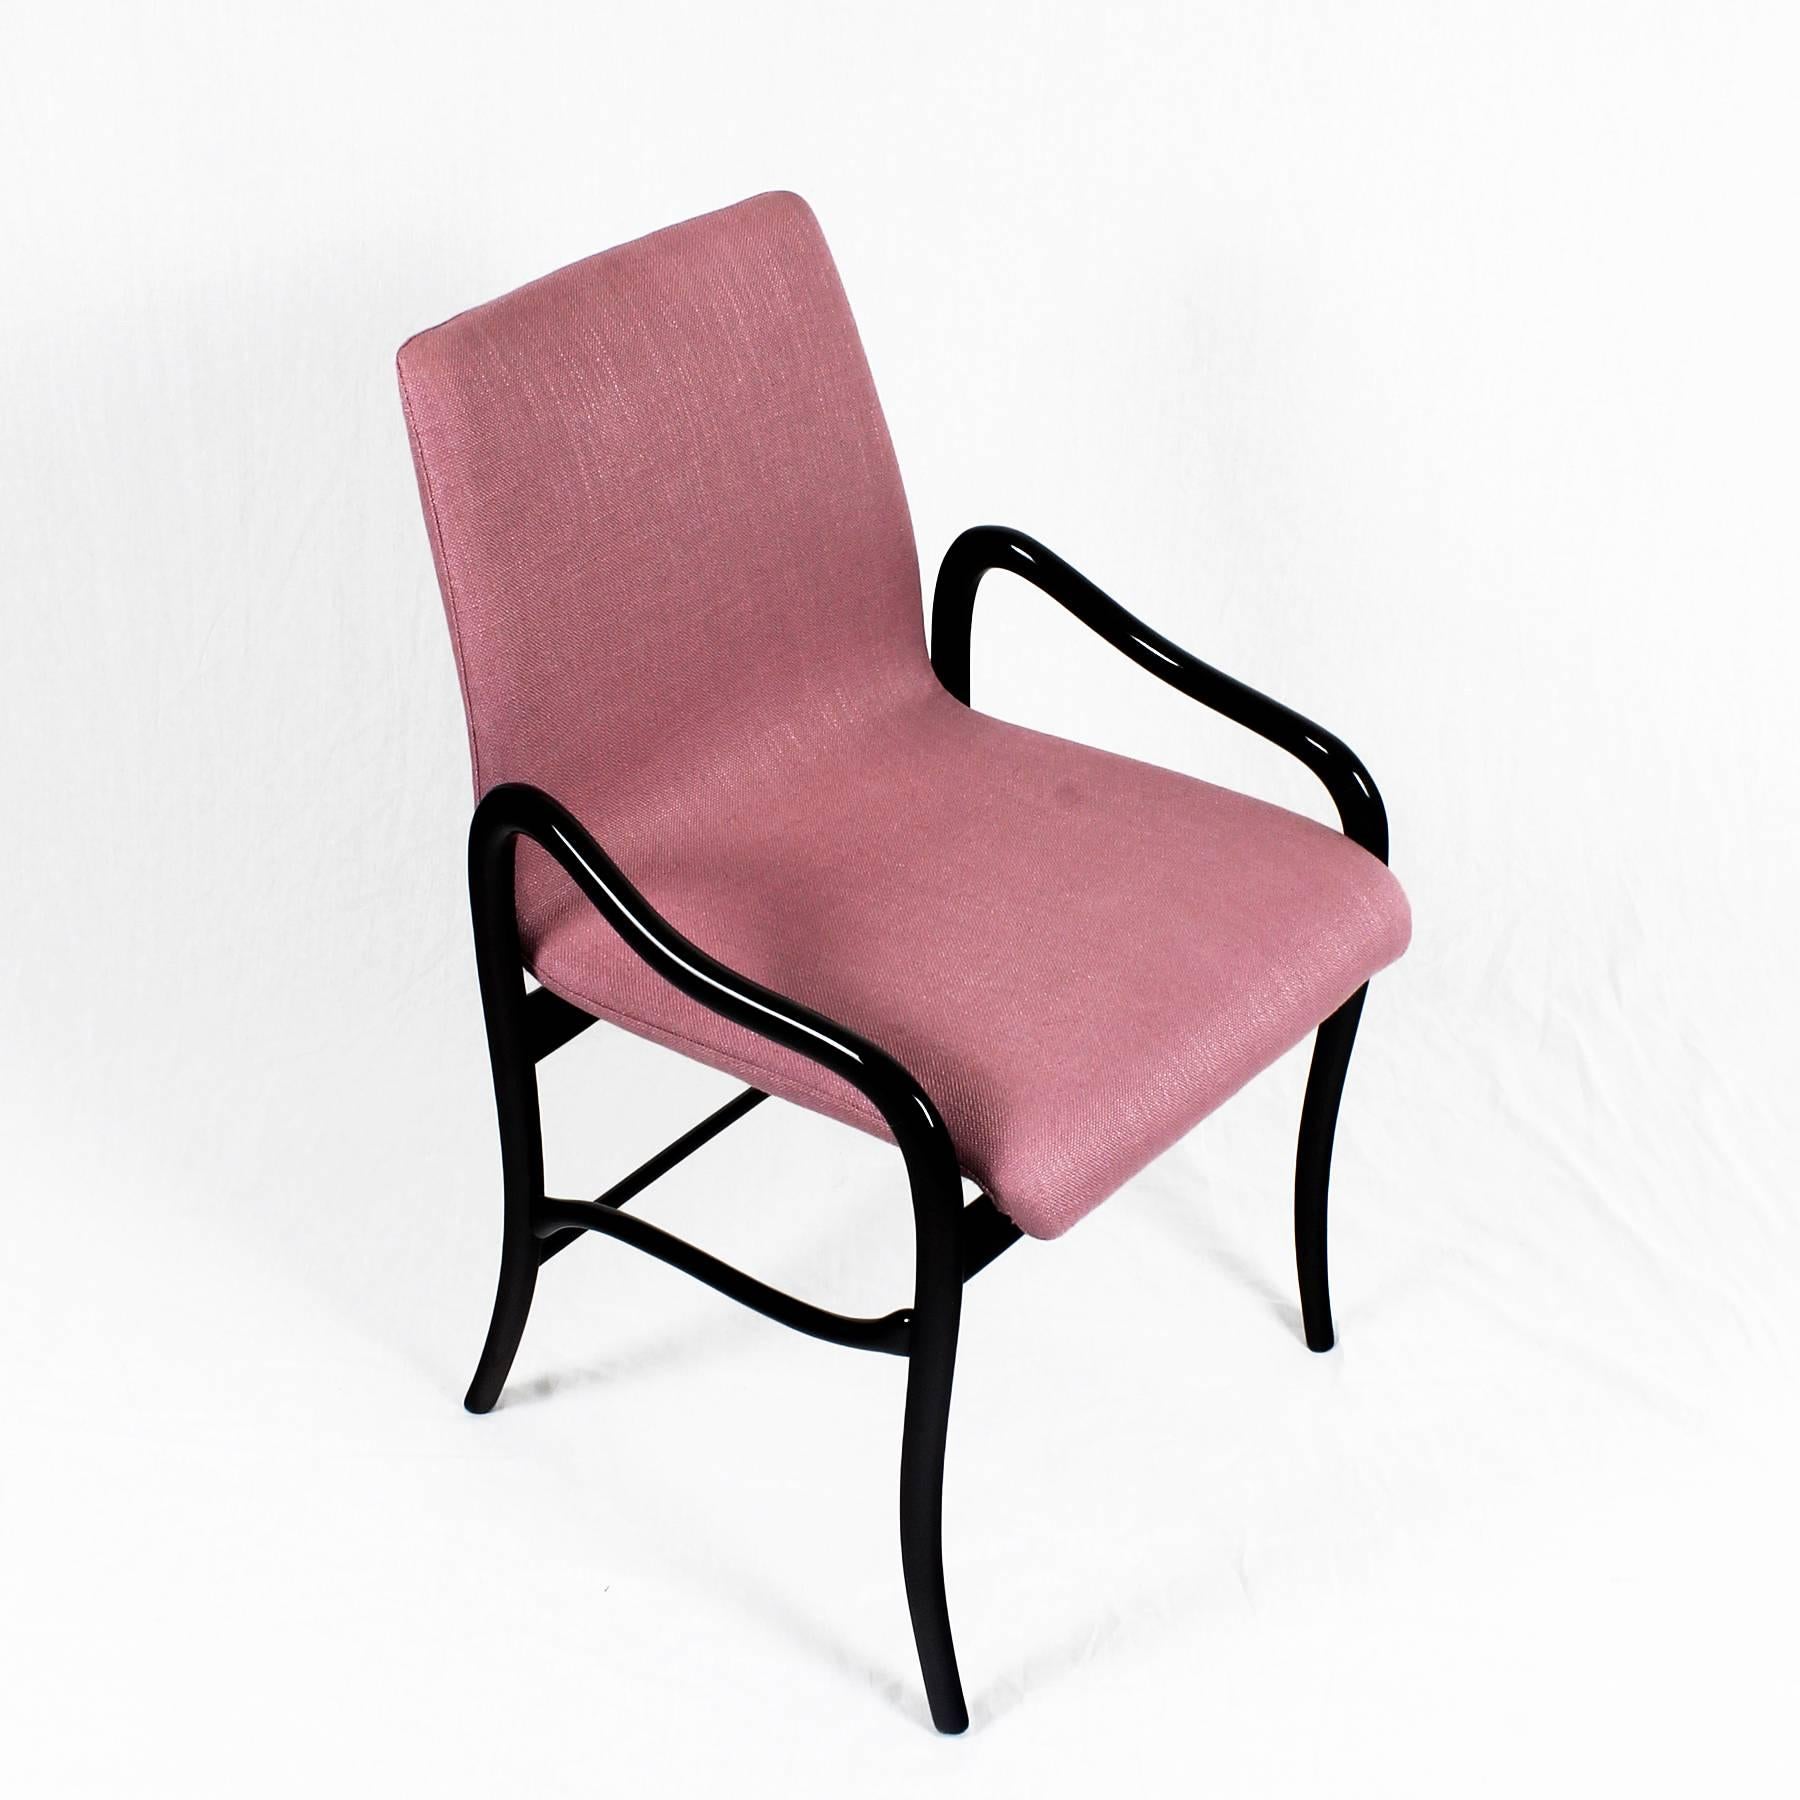 Mid-20th Century Set of Four Mid-Century Modern Armchairs by Enrico Ciuti With Pink Linen - Italy For Sale